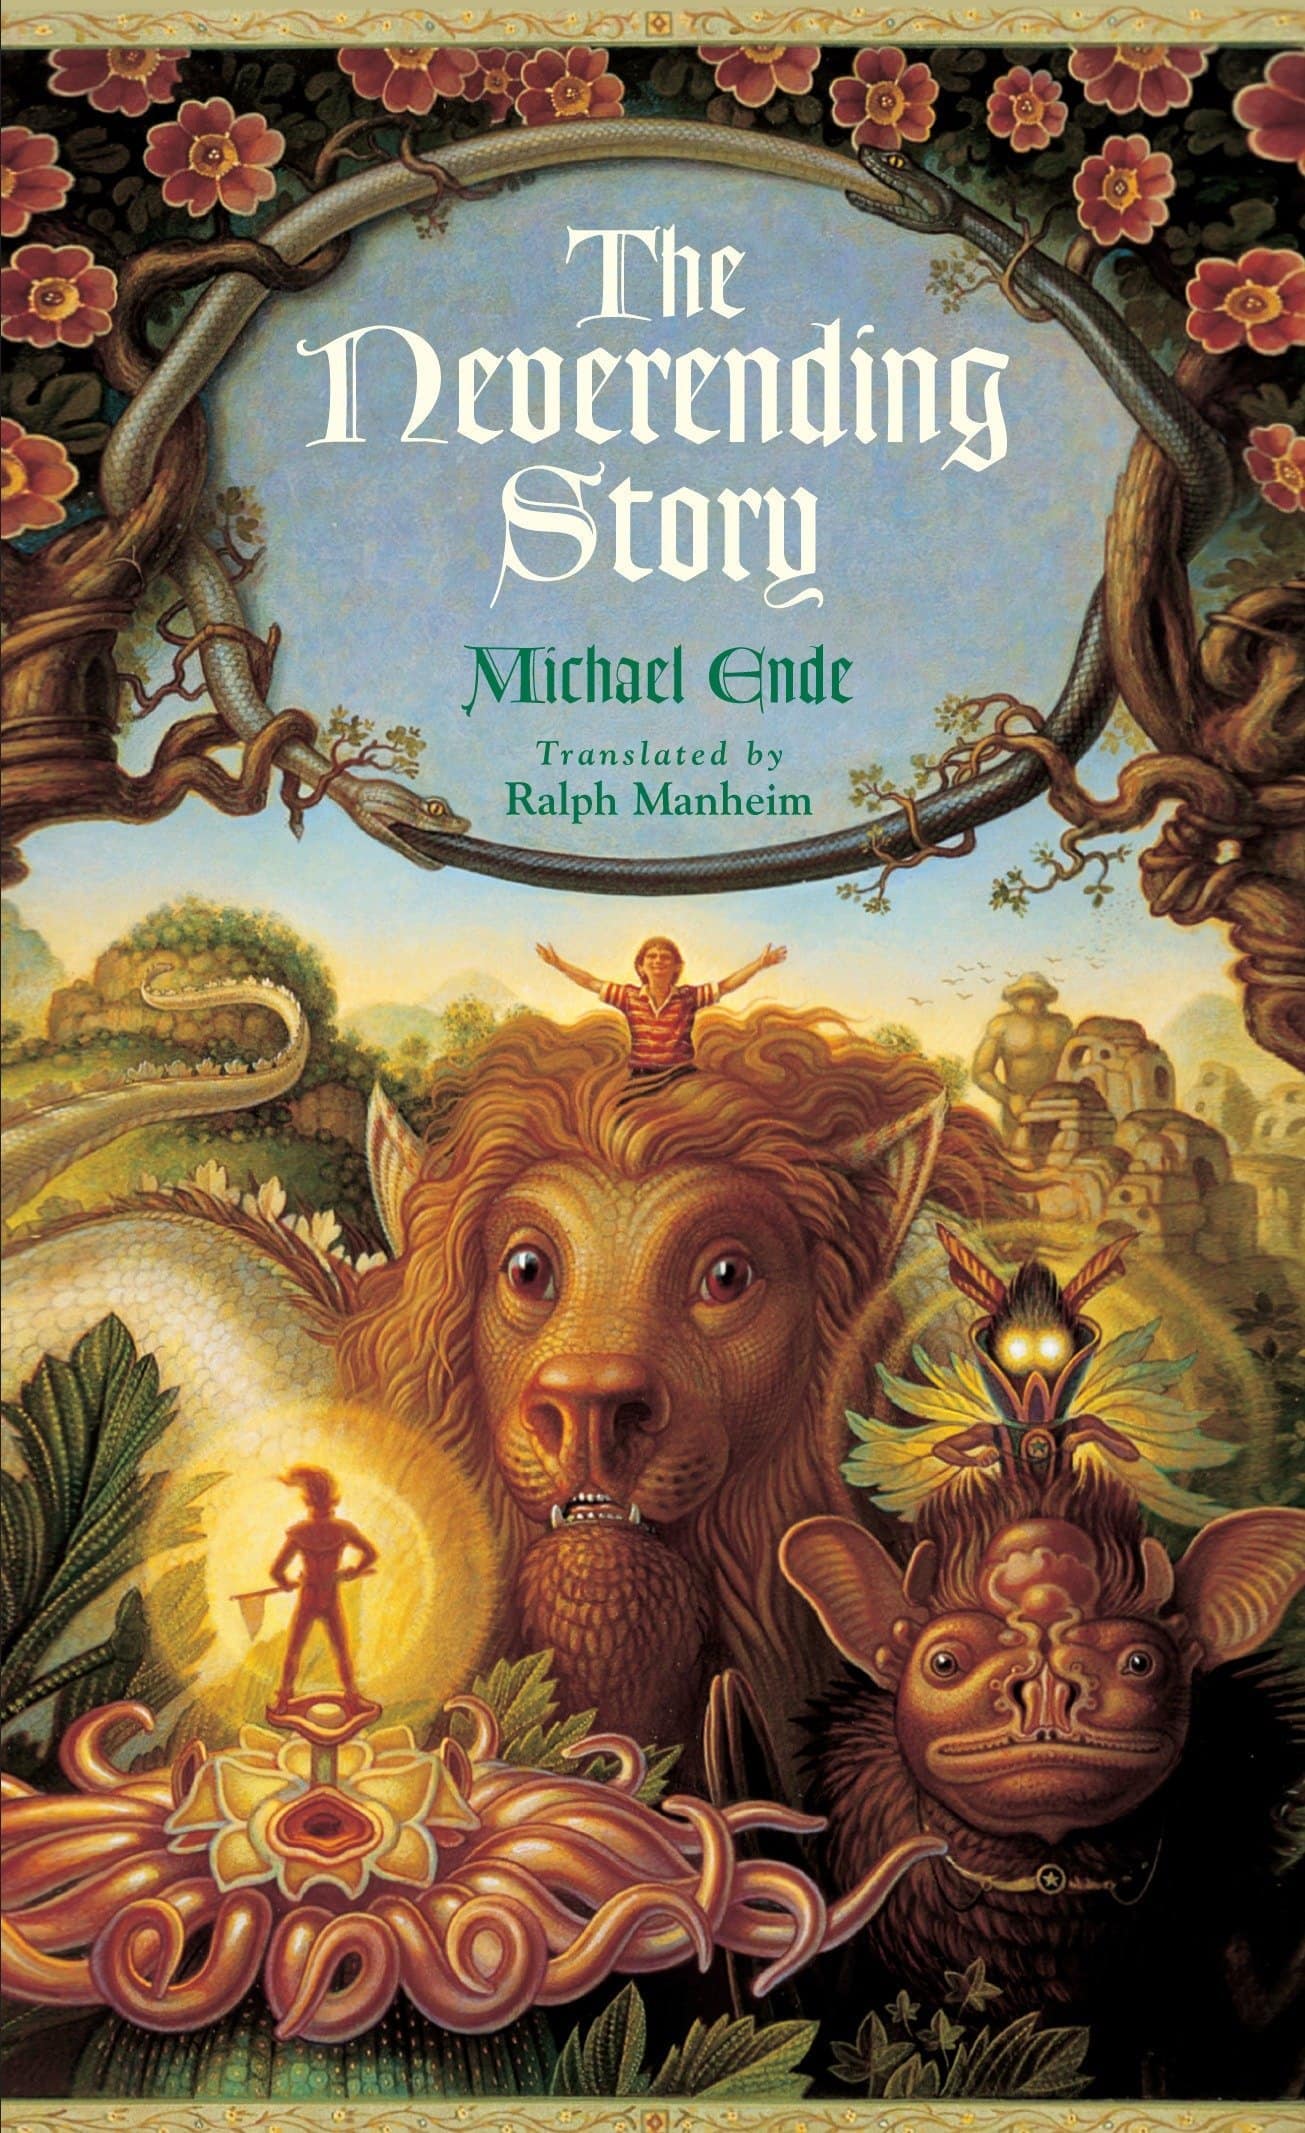 Best Books For Young Kids To Read - The neverending Story